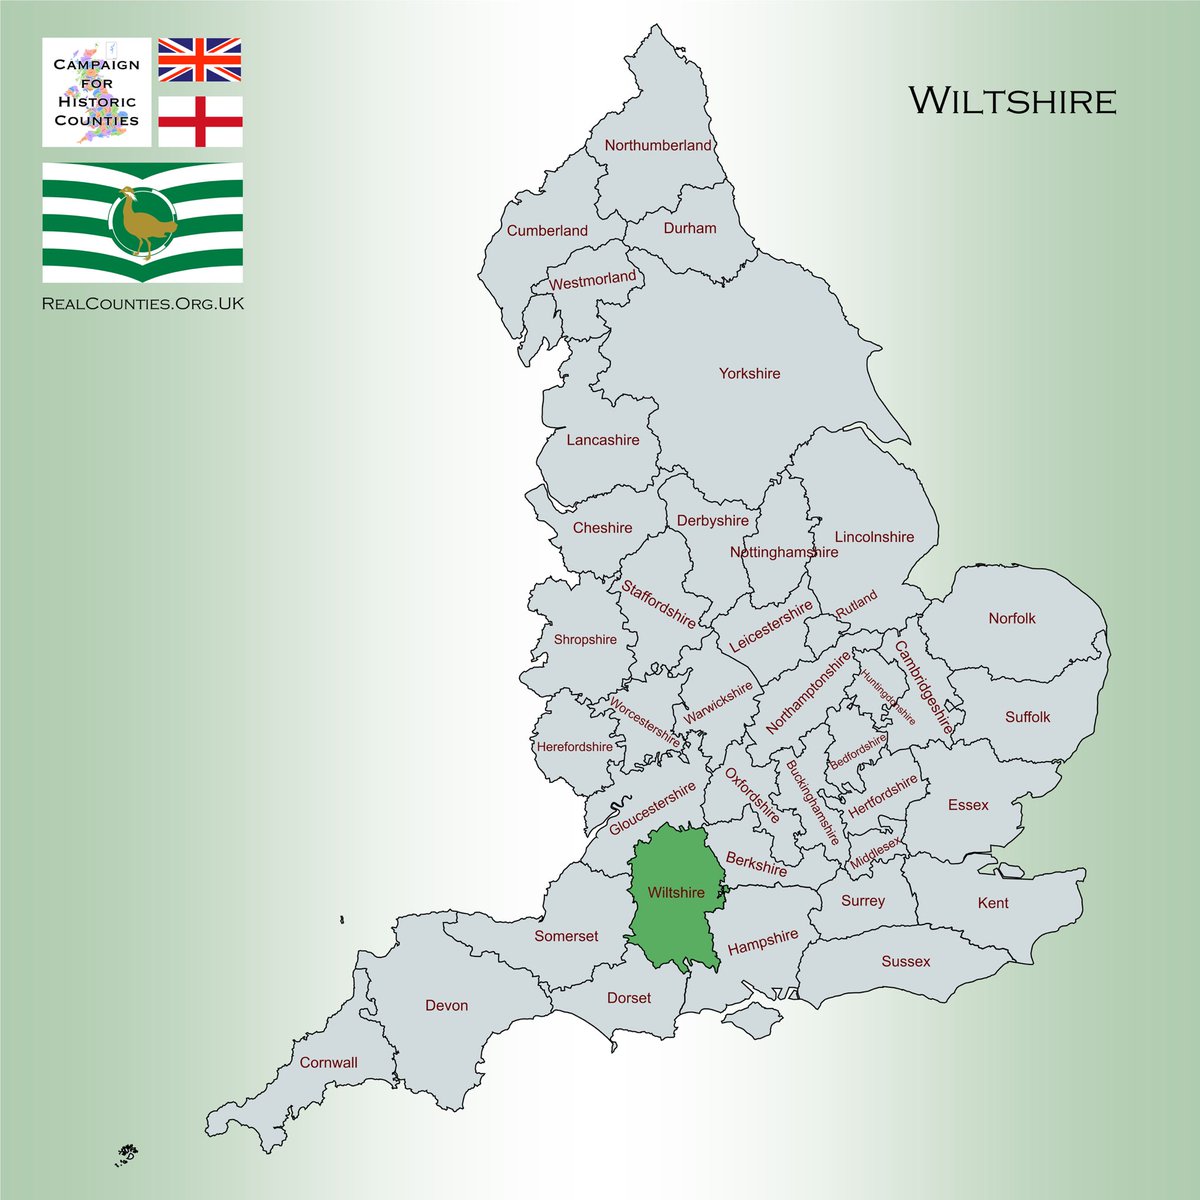 Wiltshire is a county of the West Country.

Wholly landlocked, it has borders with five other counties.

#Wiltshire is characterised by its high downland and wide valleys.

Salisbury Plain lies in the heart of Wiltshire.

🇬🇧 #HistoricCounties | #RealCounties 🏴󠁧󠁢󠁥󠁮󠁧󠁿